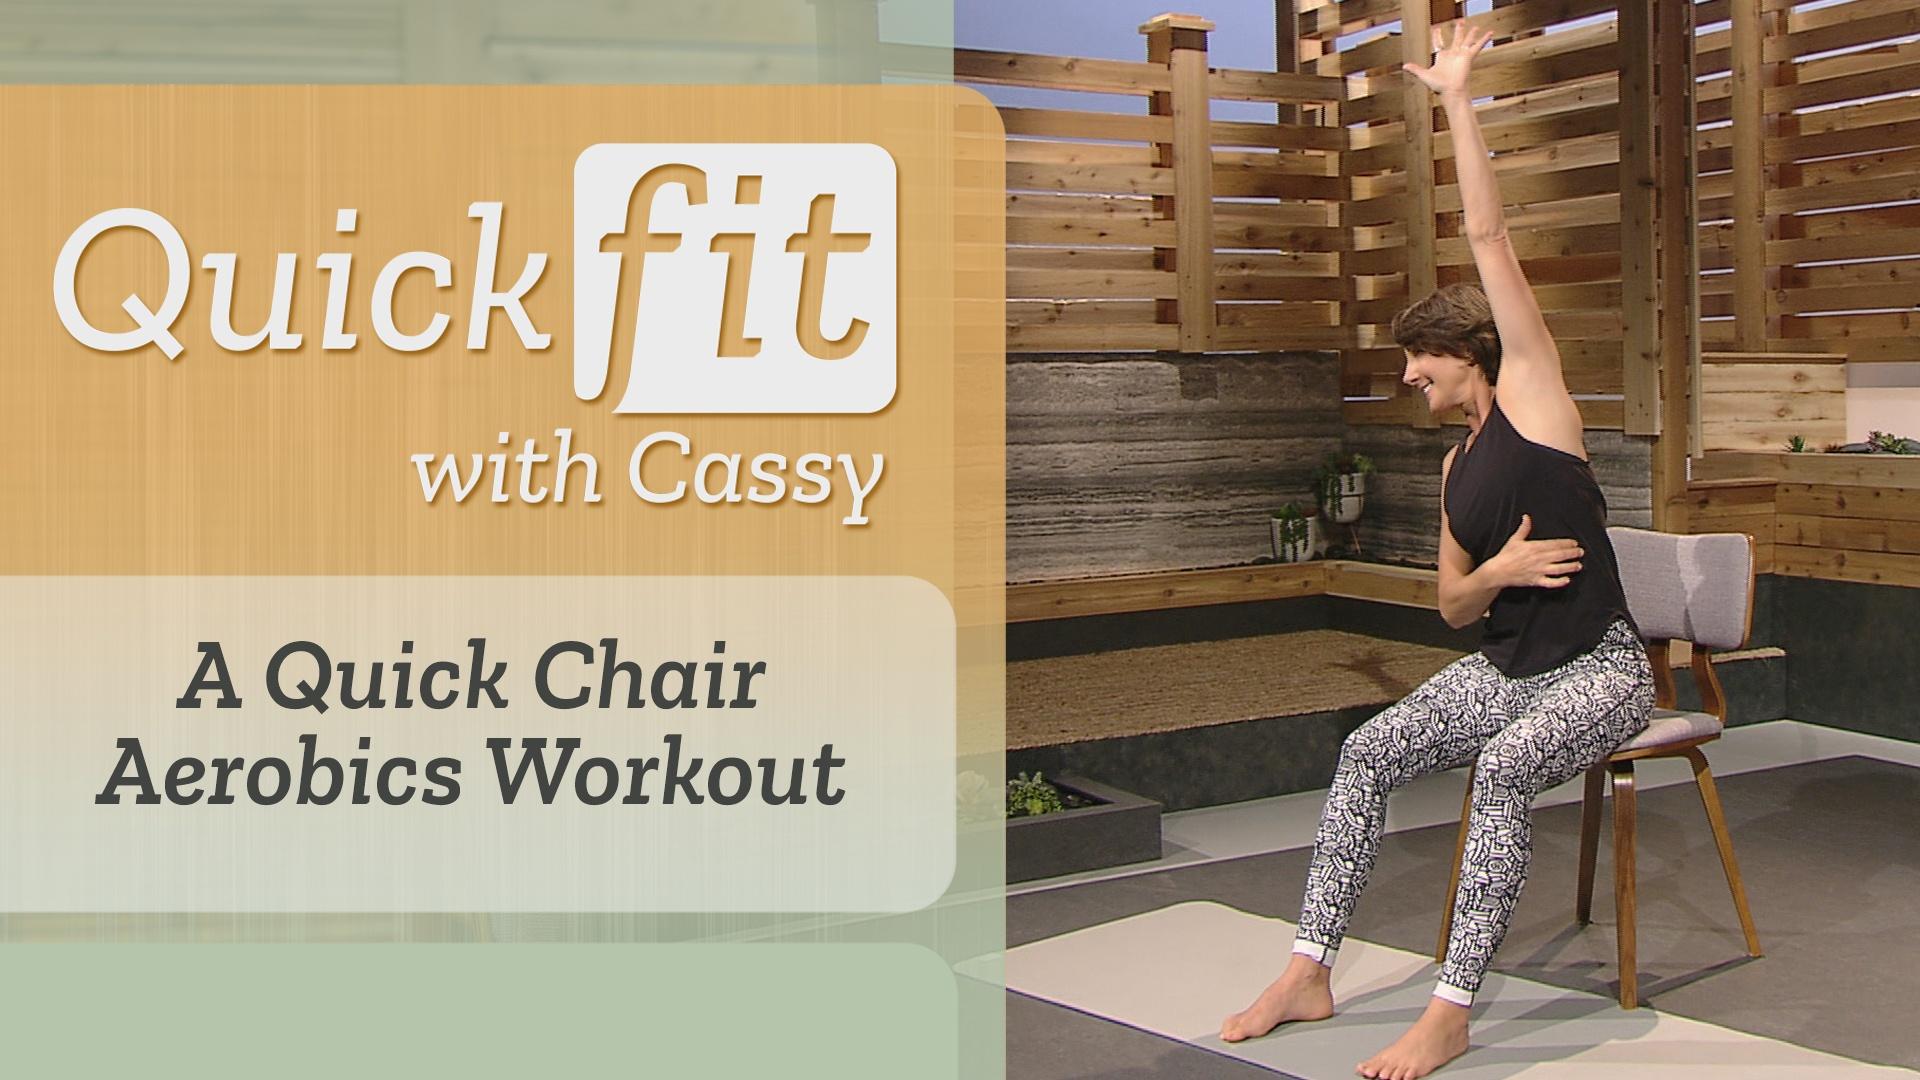 Quick Fit with Cassy, A Quick Chair Aerobics Workout